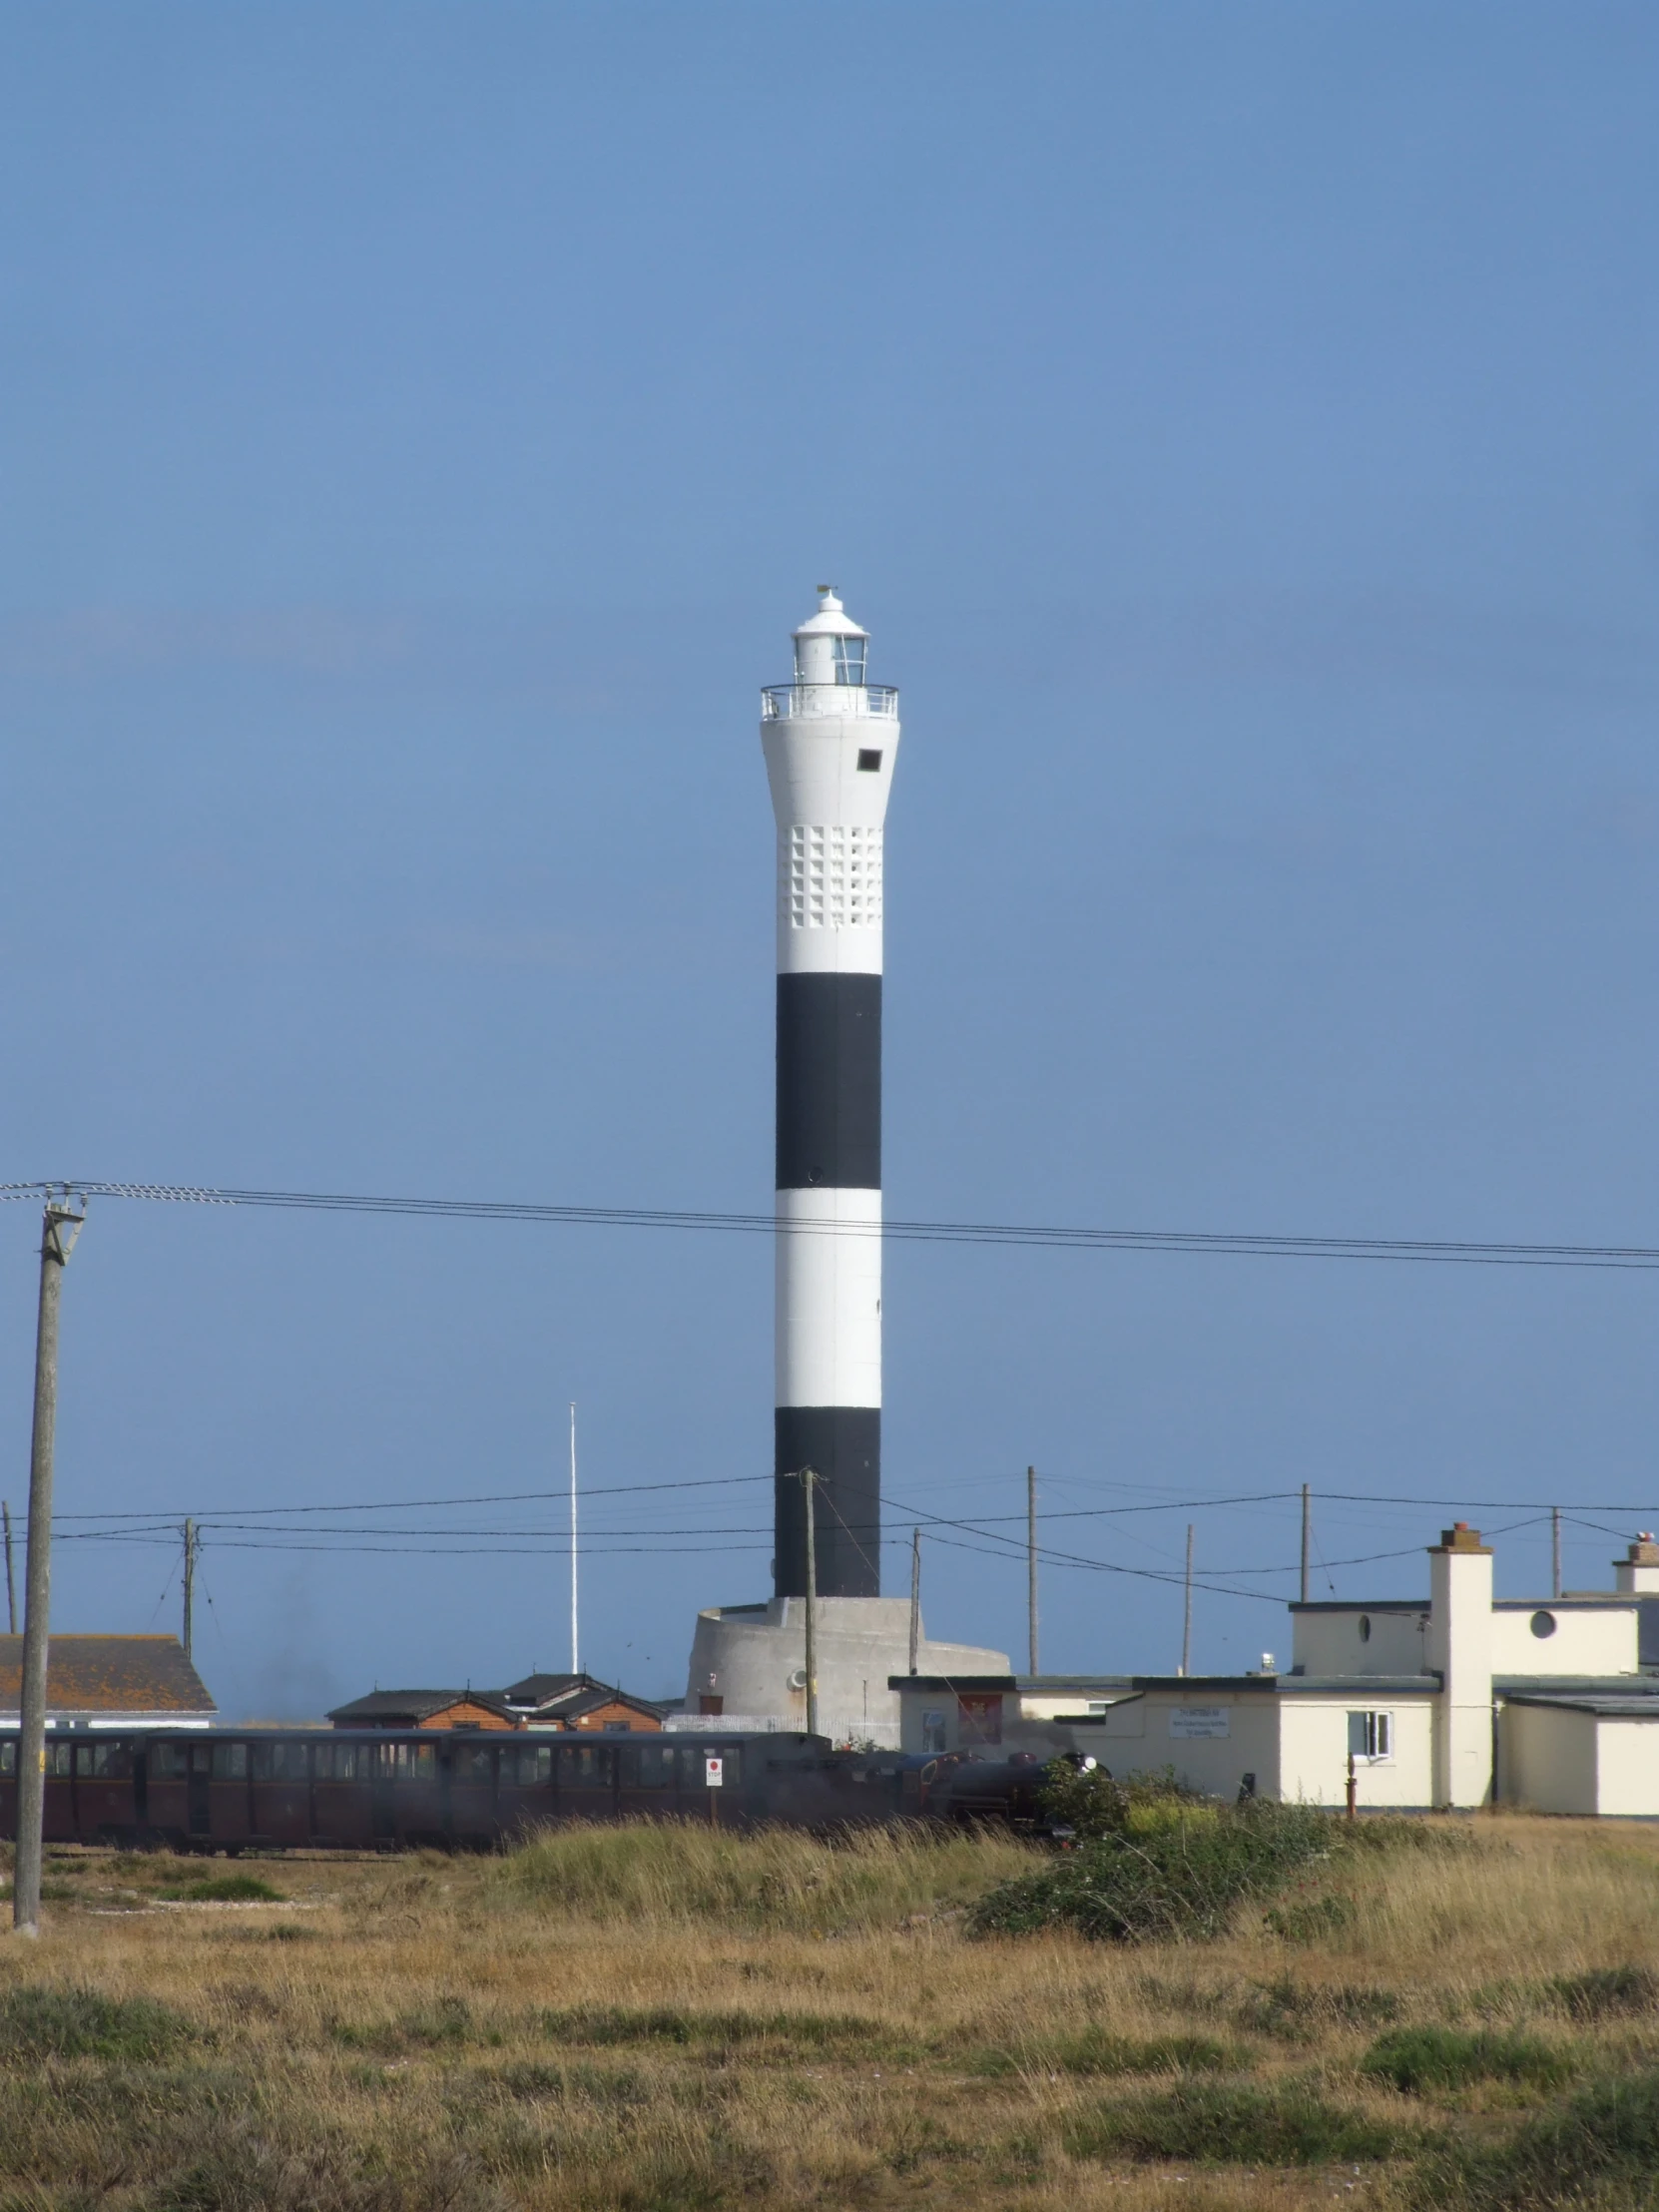 there is a small white and black lighthouse next to the road